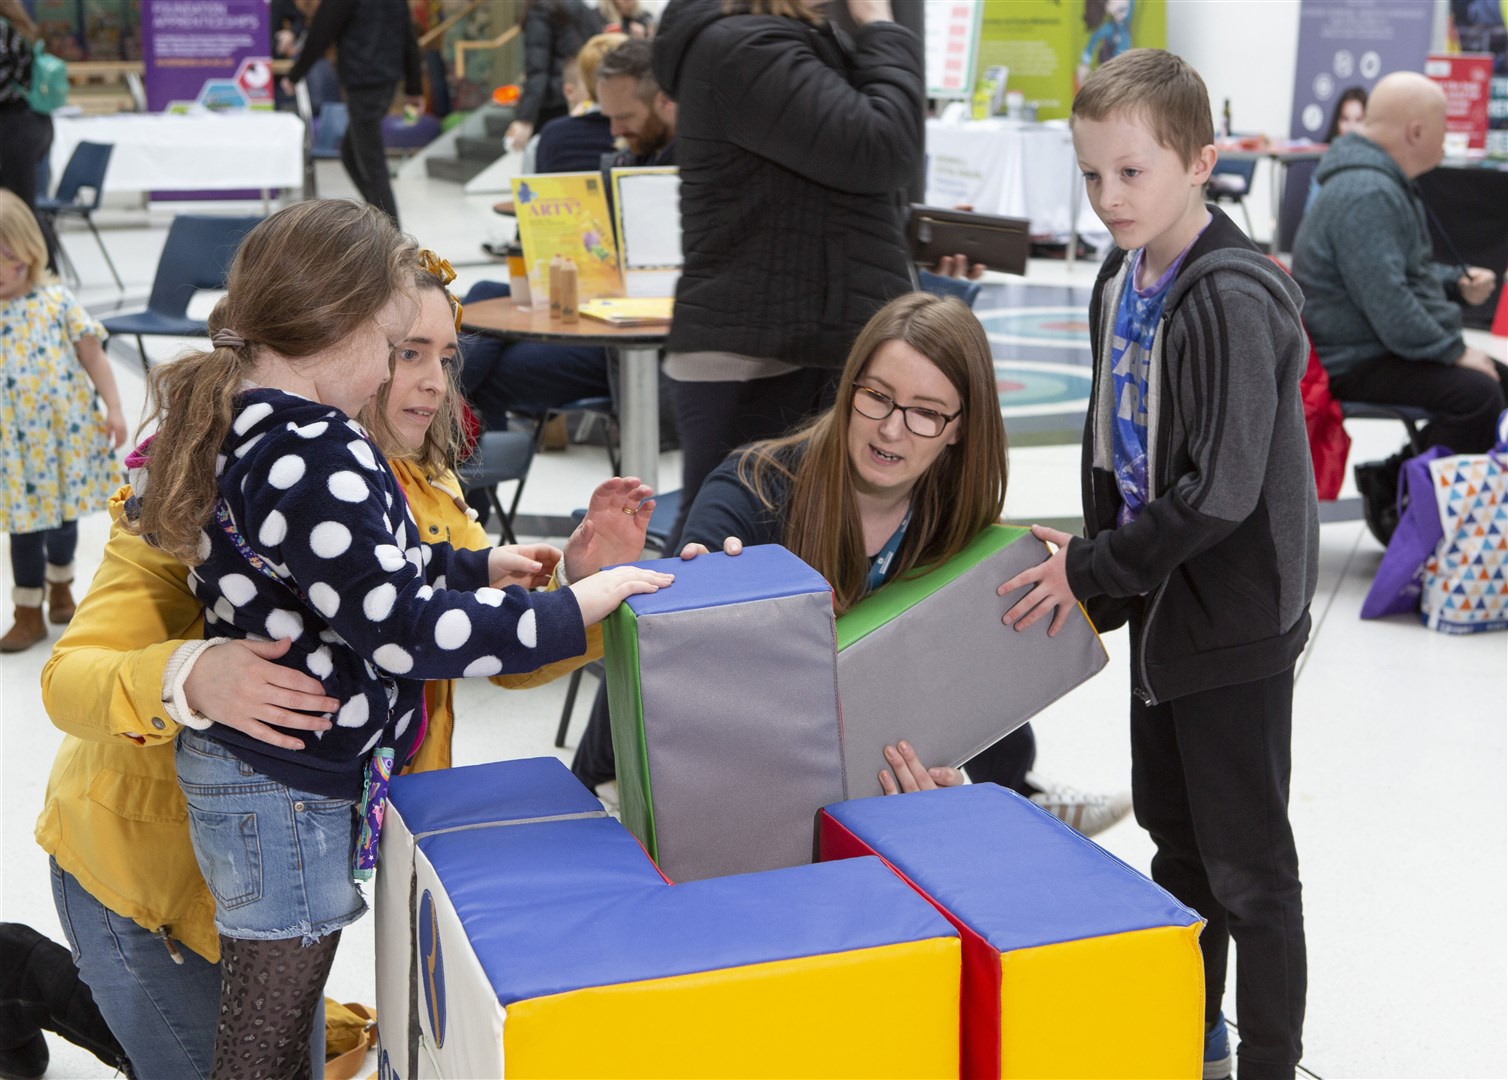 Jade O'Hara from construction company Robertson joins Emily and Charlie Macleod for some puzzle solving at the Eastgate Centre.